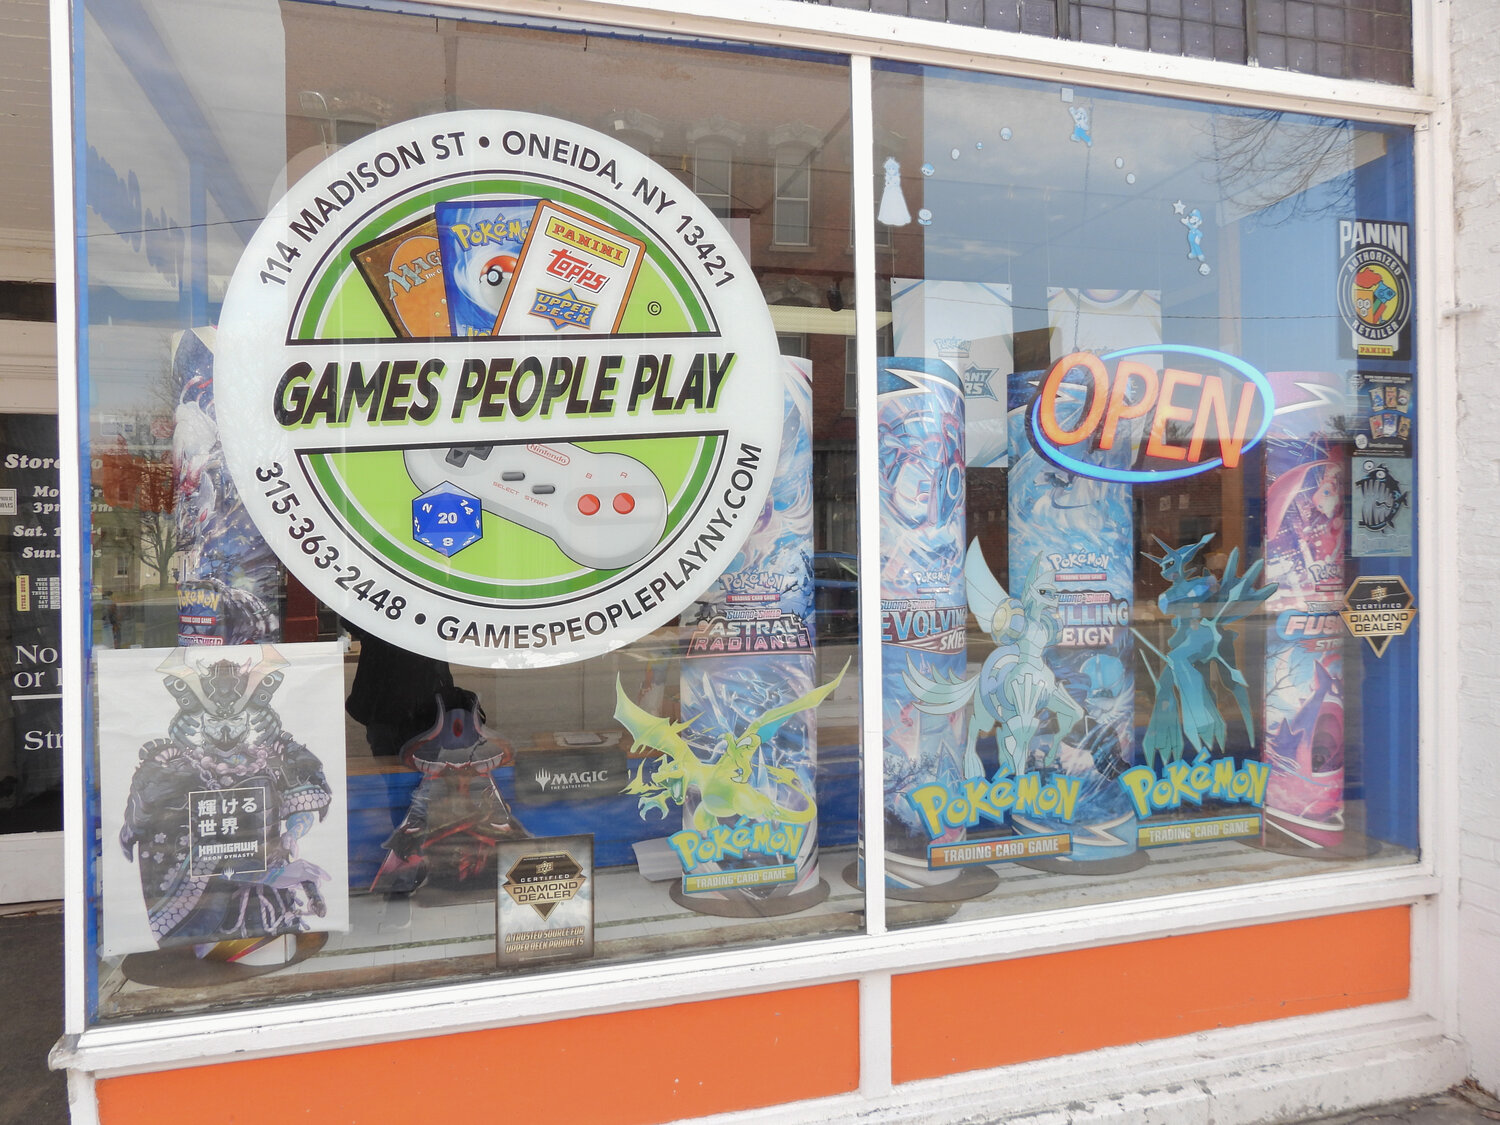 Games People Play is a gaming store that sells a little bit of everything — baseball and basketball cards, books on Dungeons and Dragons, the latest Magic: The Gathering cards, vintage consoles, and so much more.